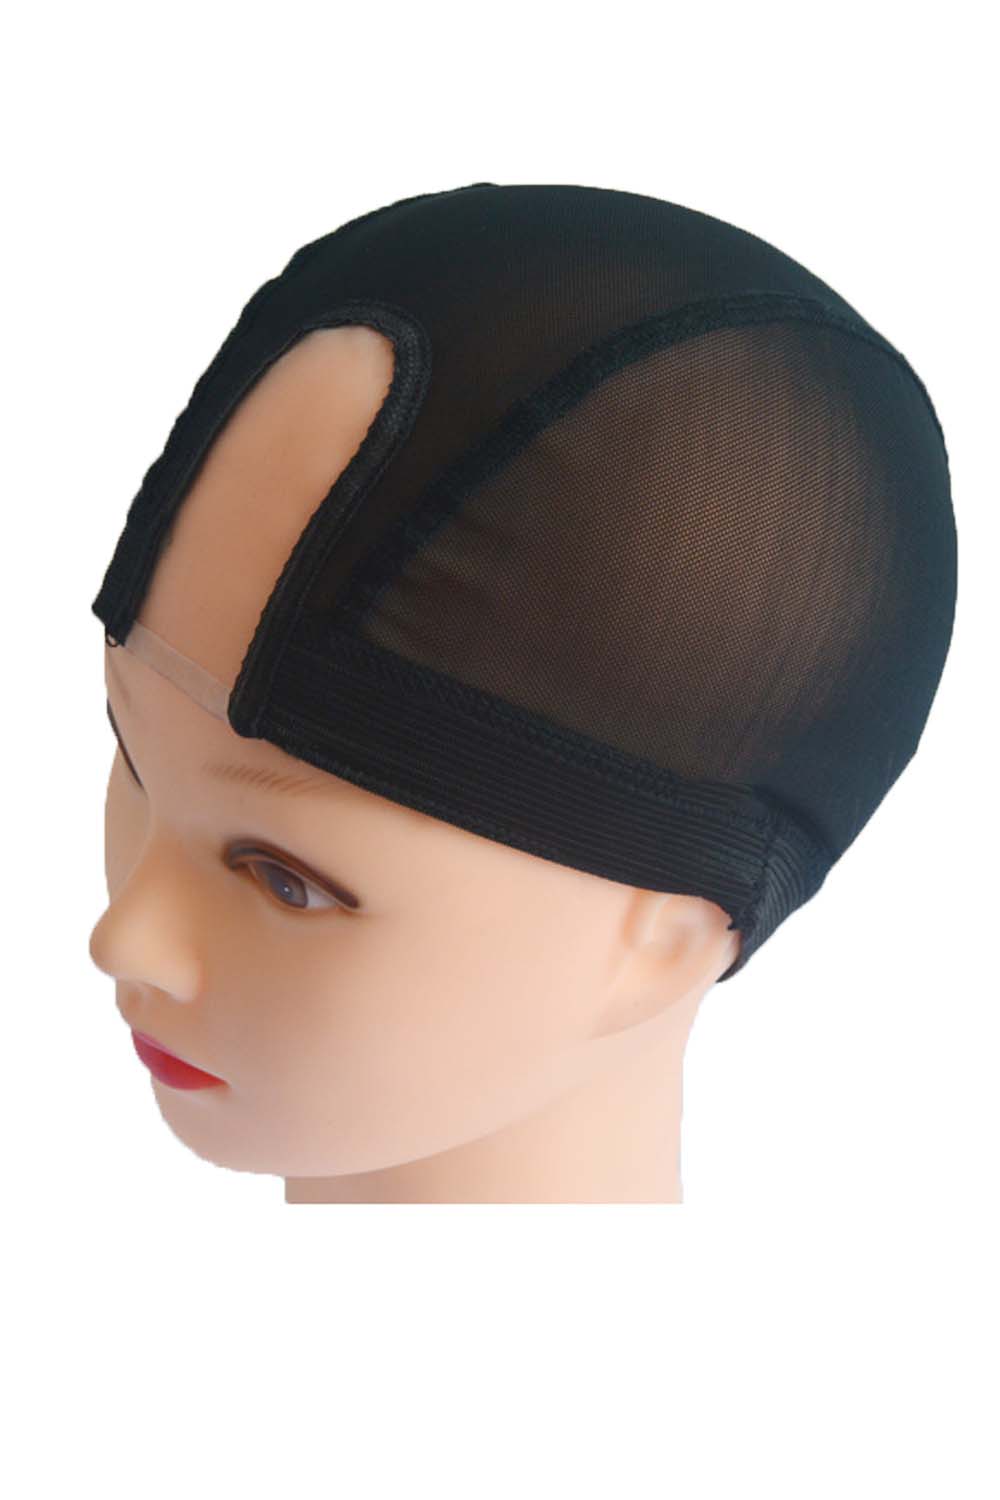 thin-u-part-black-ventilated-dome-cap-diy-making-your-own-wig